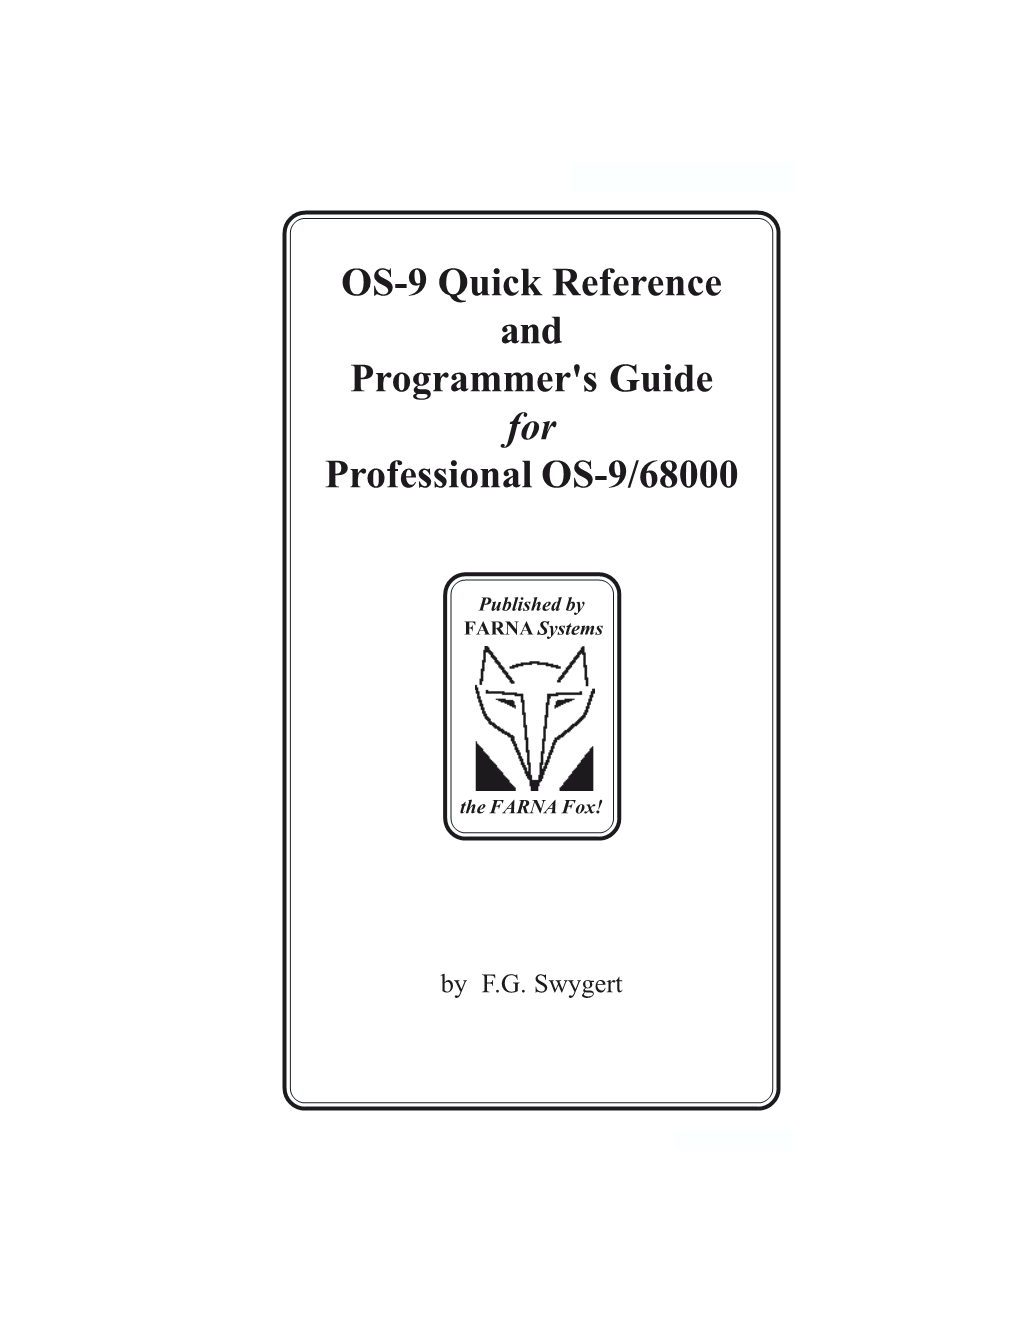 OS-9 Quick Reference and Programmer's Guide for Professional OS-9/68000